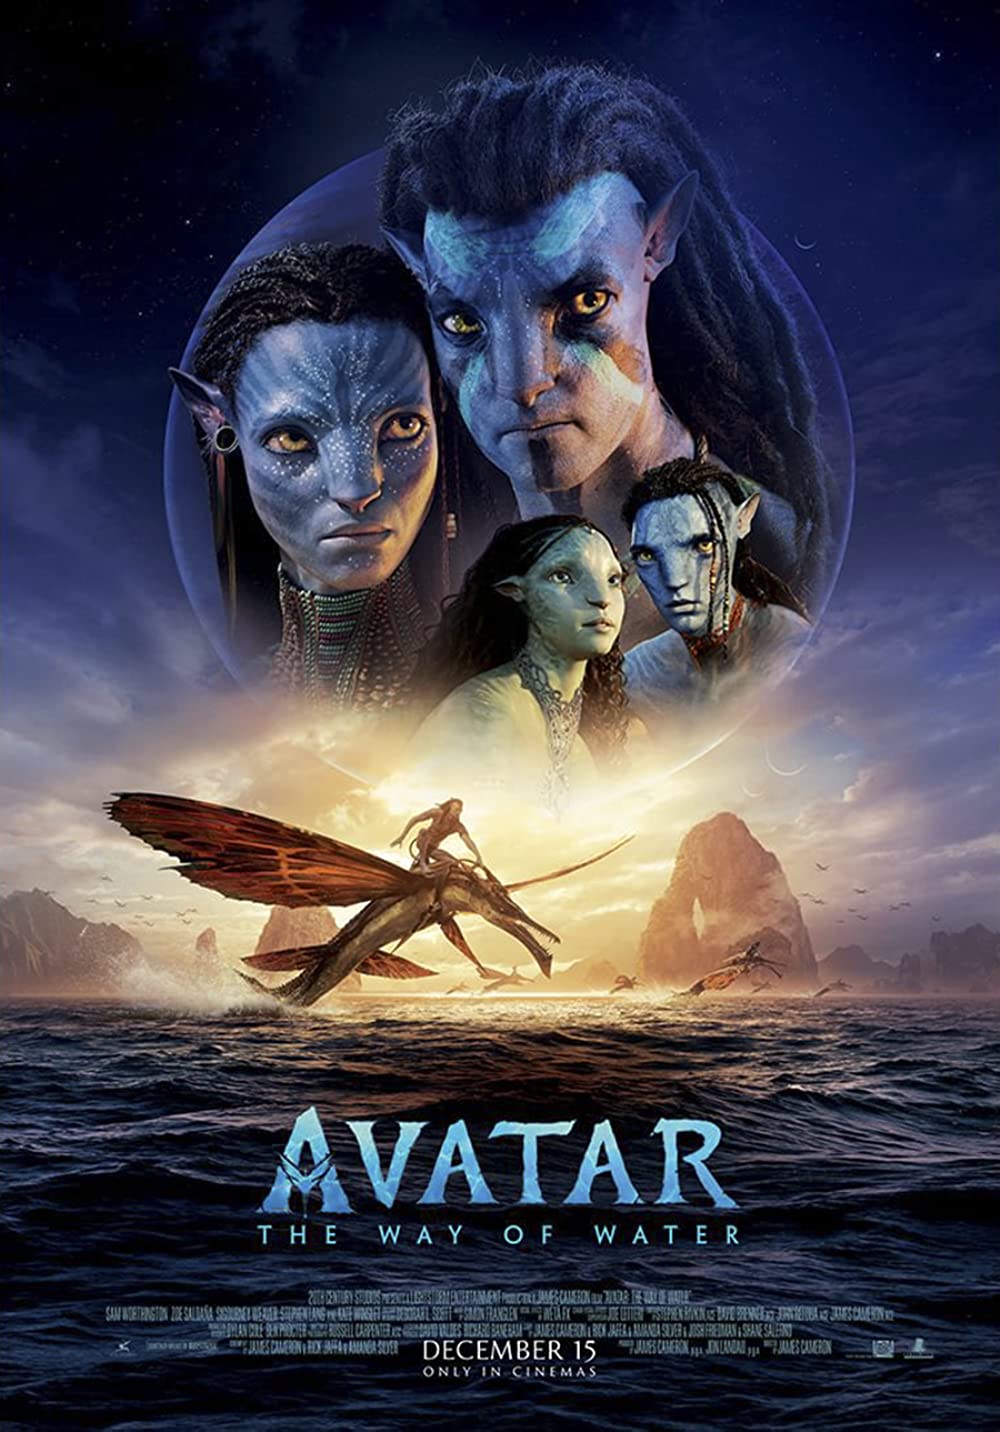 “Avatar: The Way of Water”: One-Sentence Review